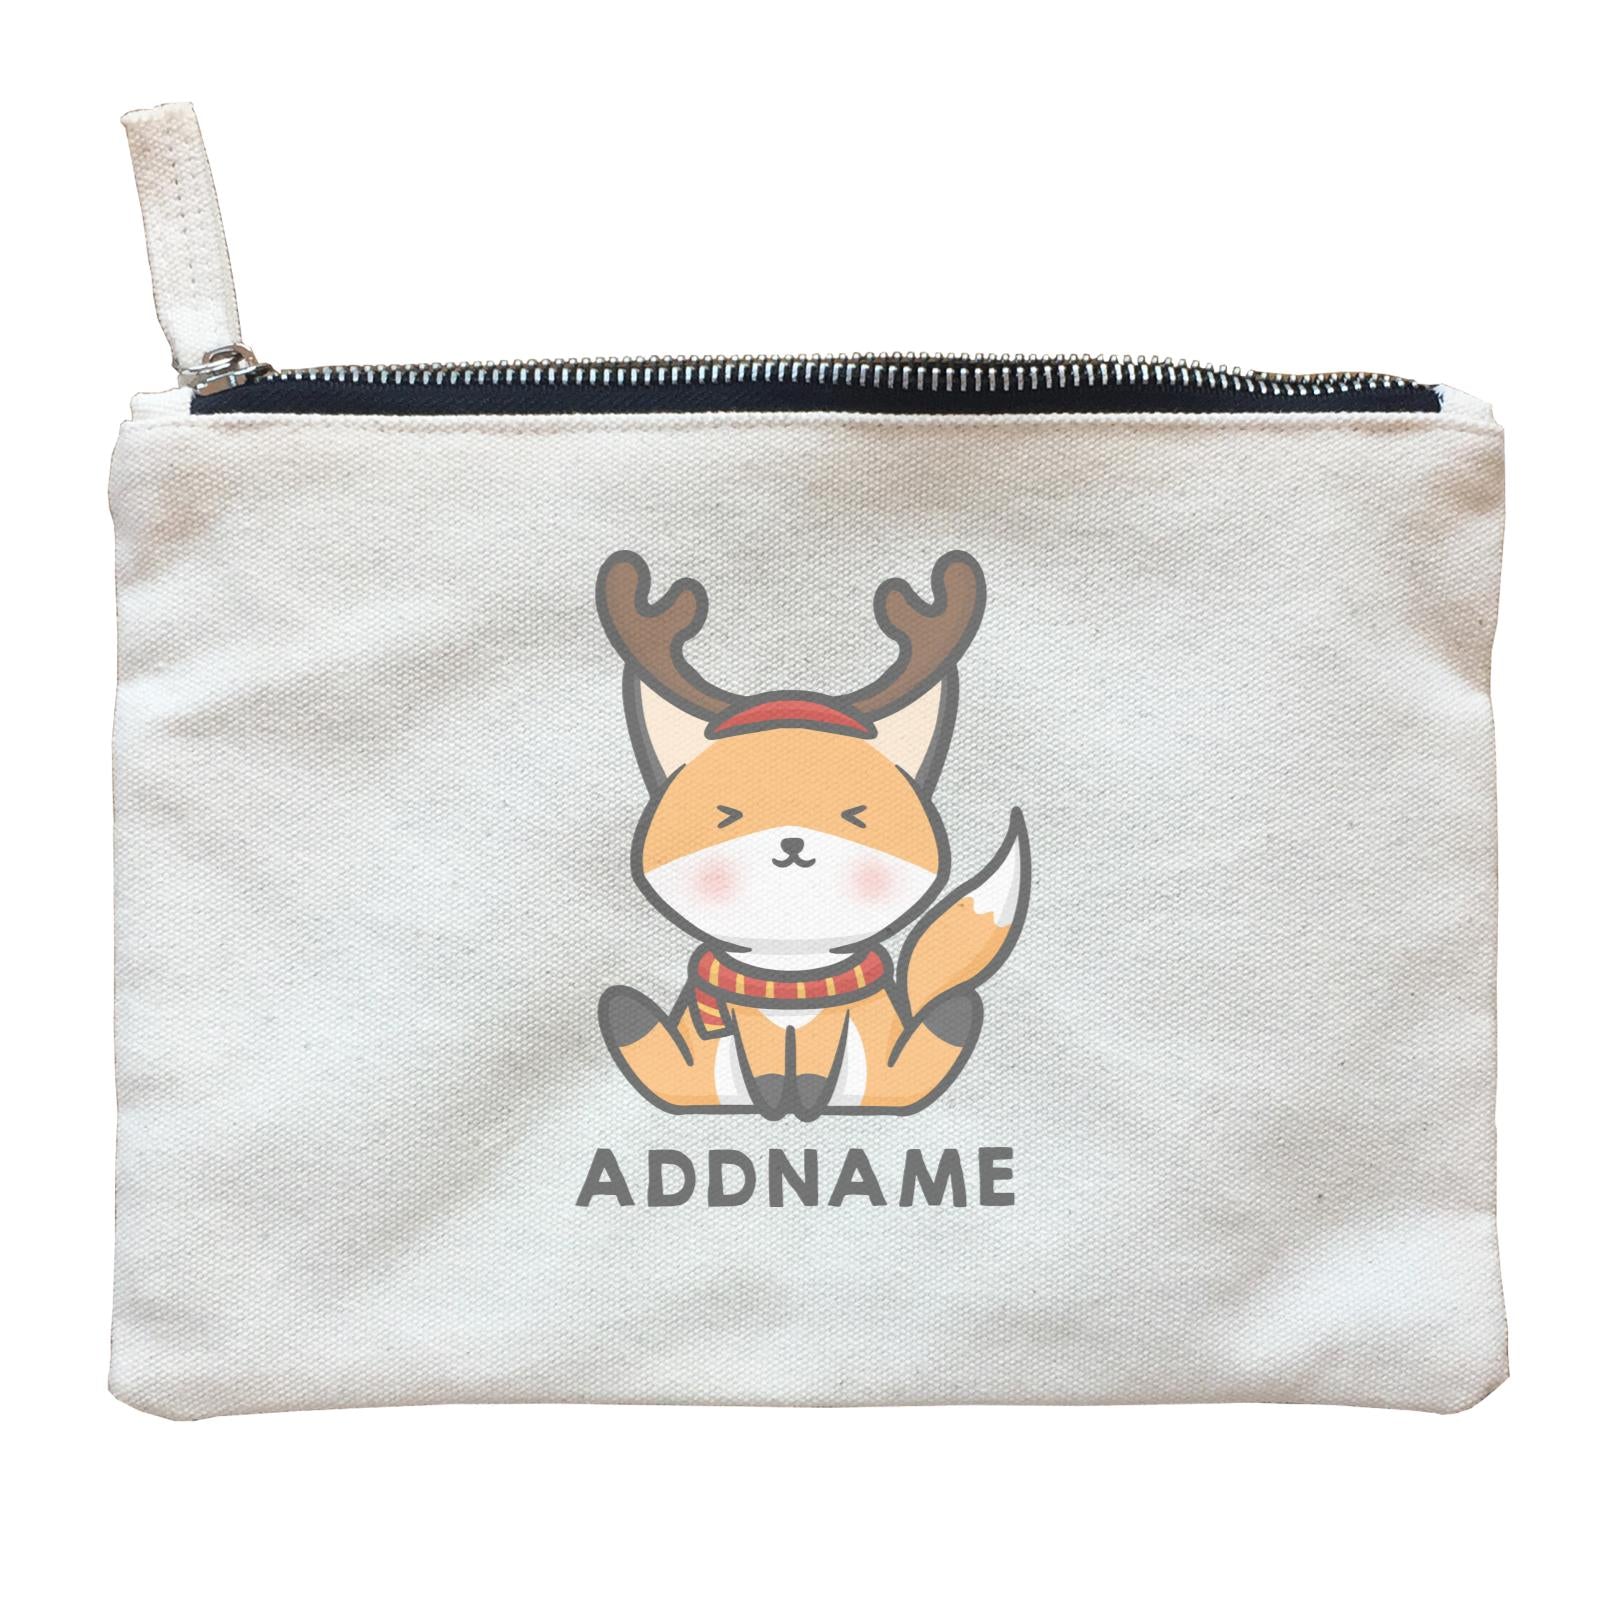 Xmas Cute Fox With Reindeer Antlers Addname Accessories Zipper Pouch